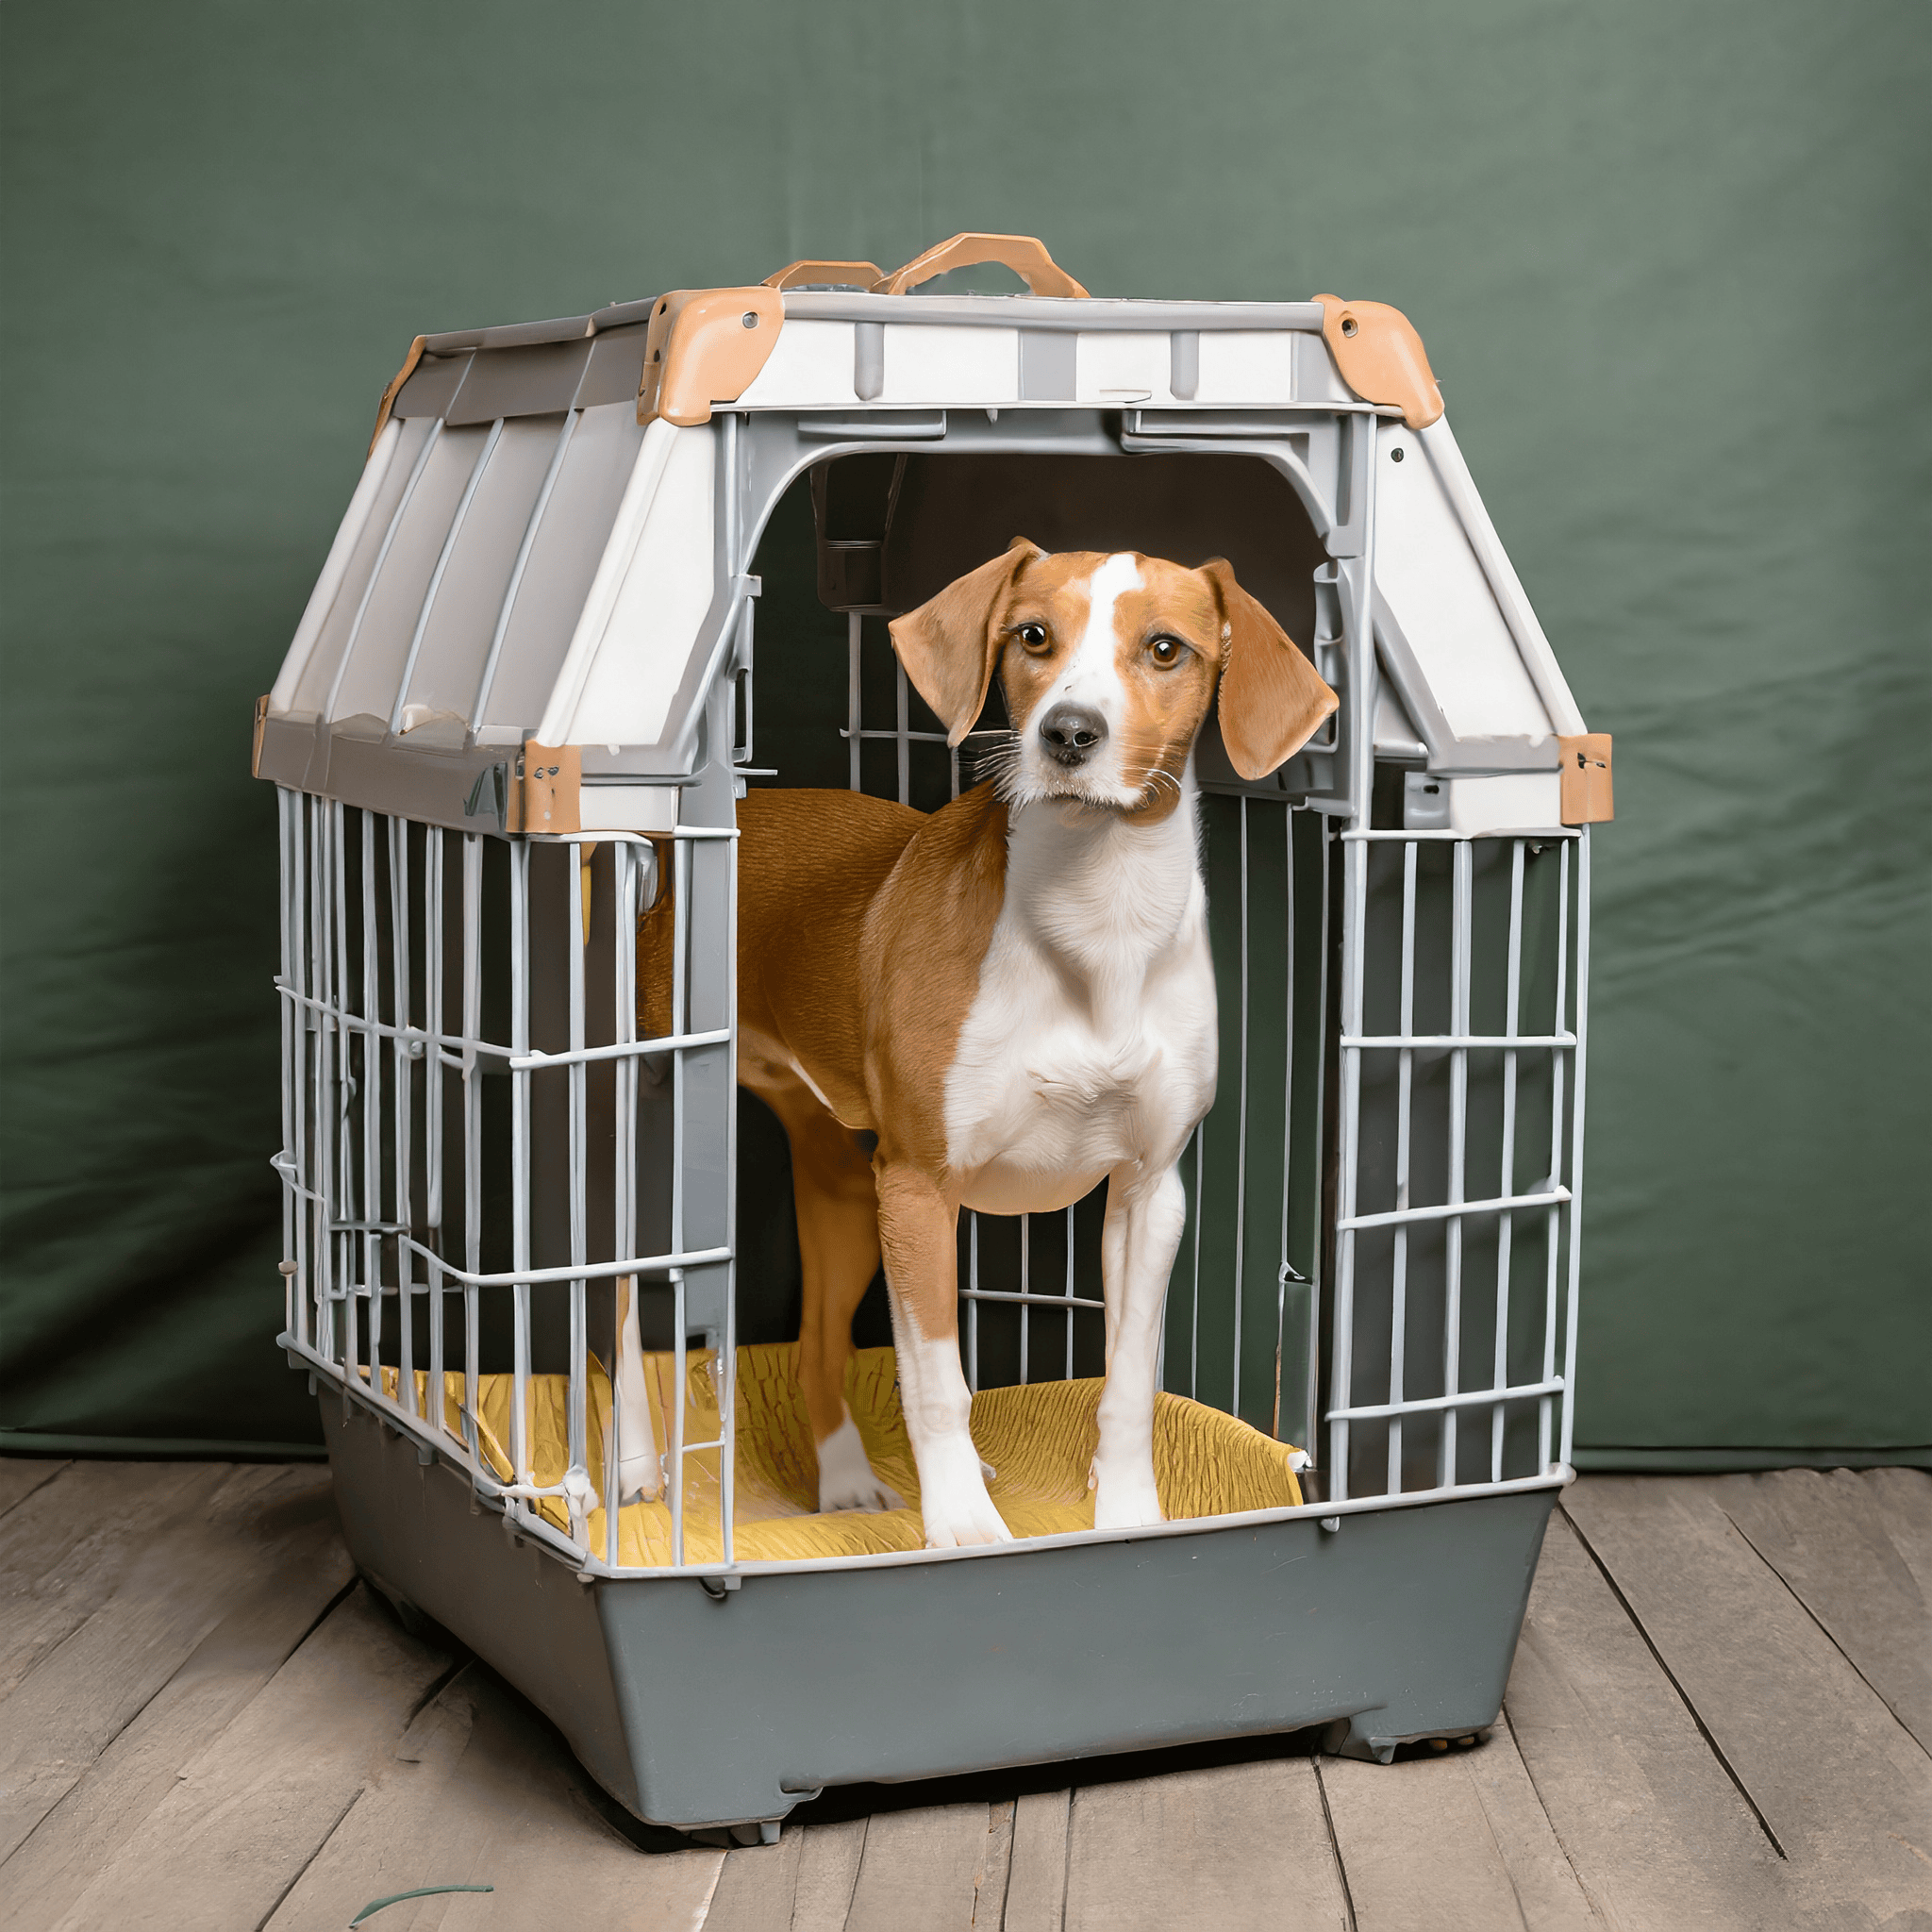 A puppy crate should be the right size for crate training.